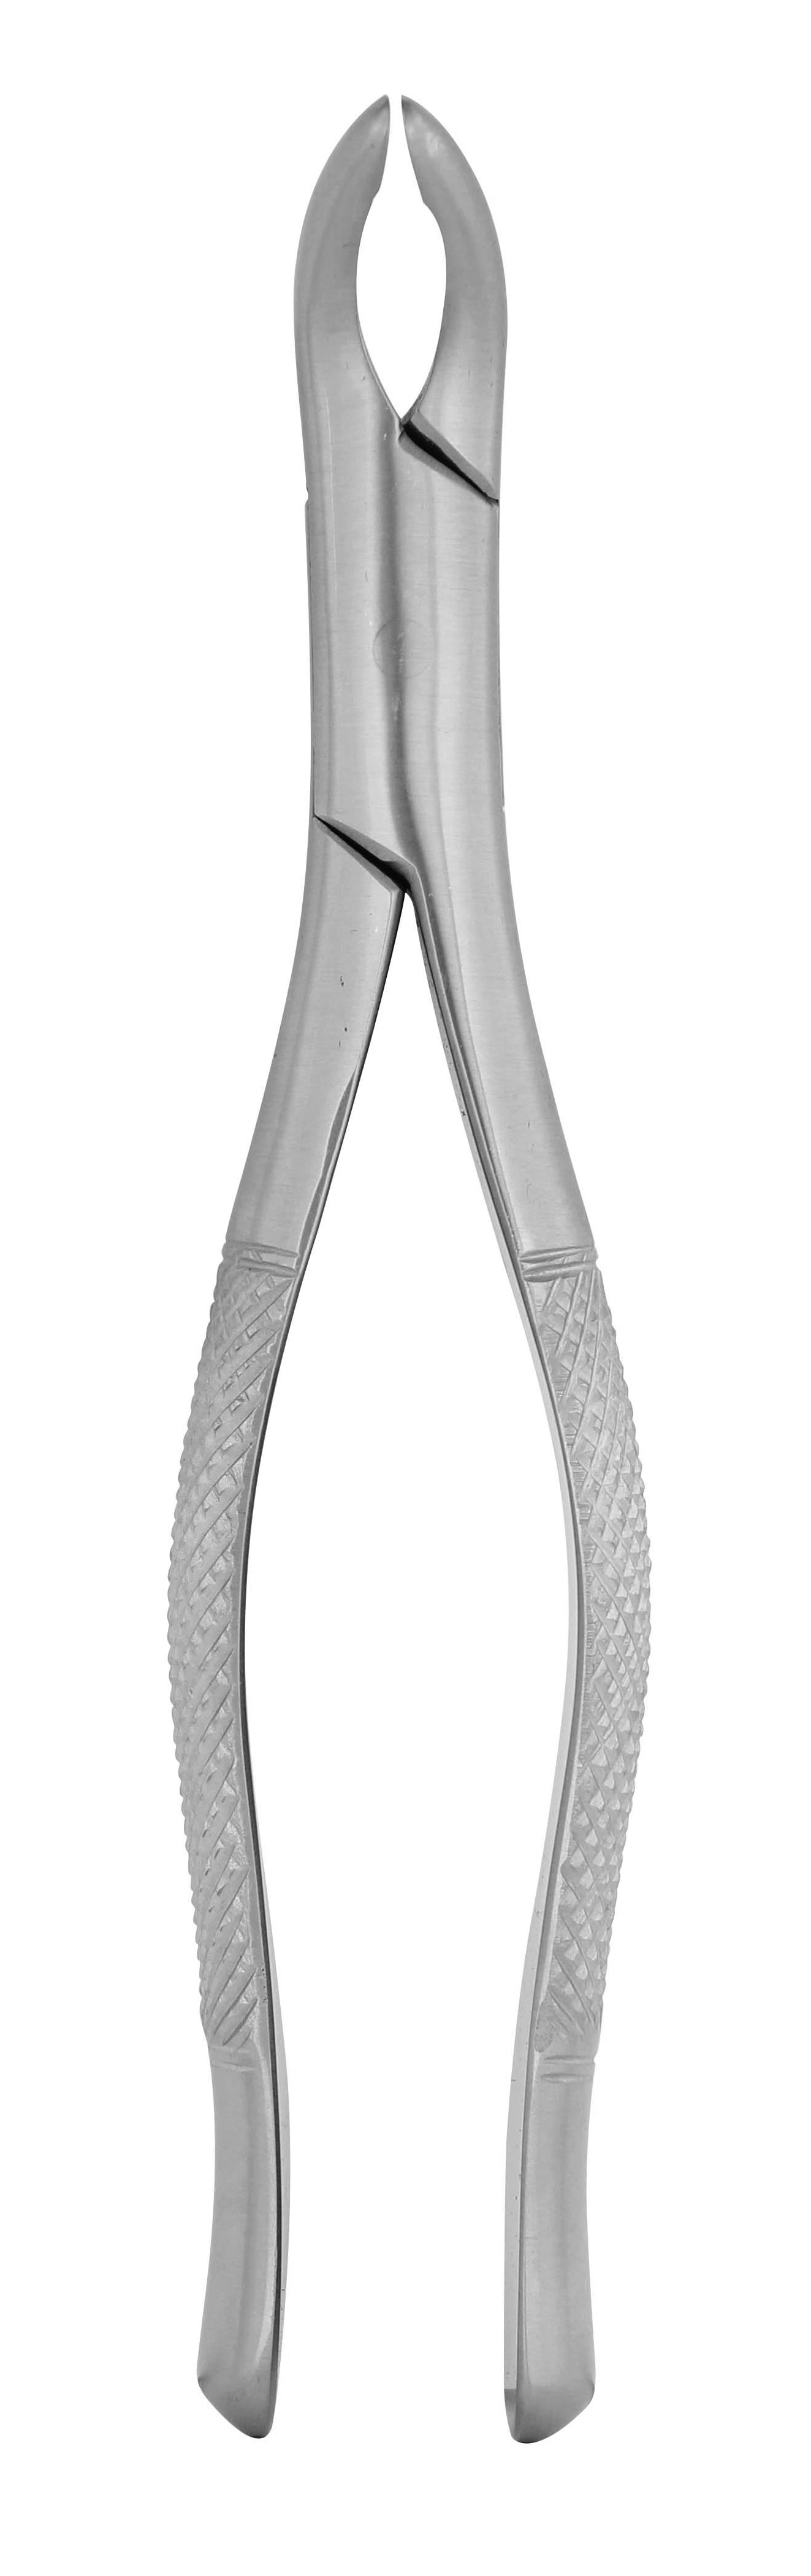 Extraction Forceps 203